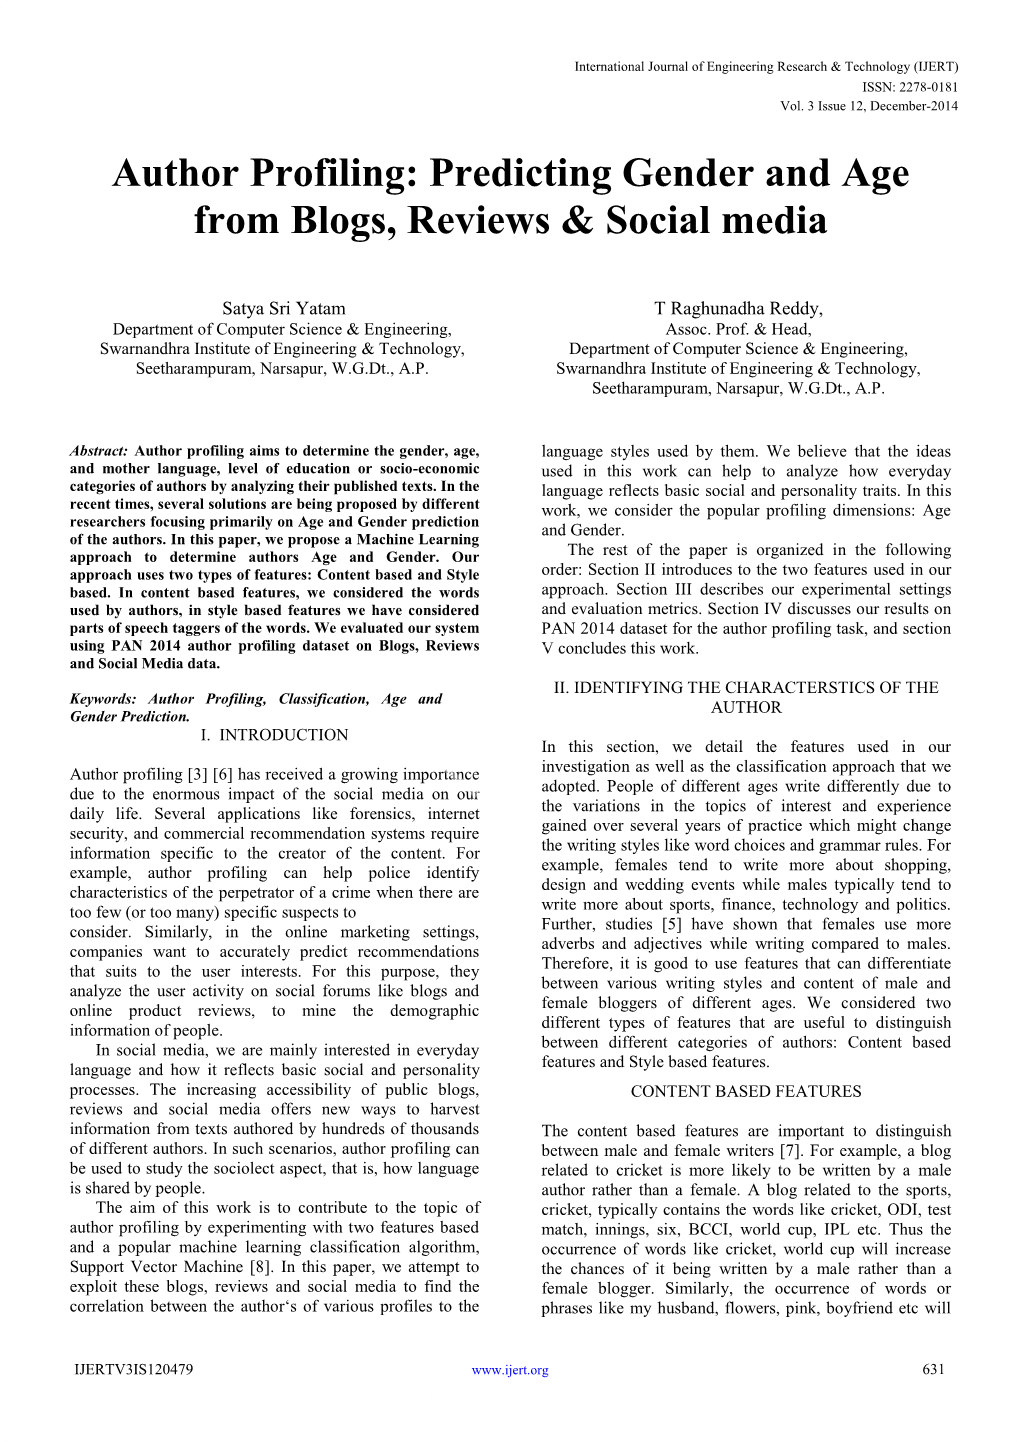 Predicting Gender and Age from Blogs, Reviews & Social Media